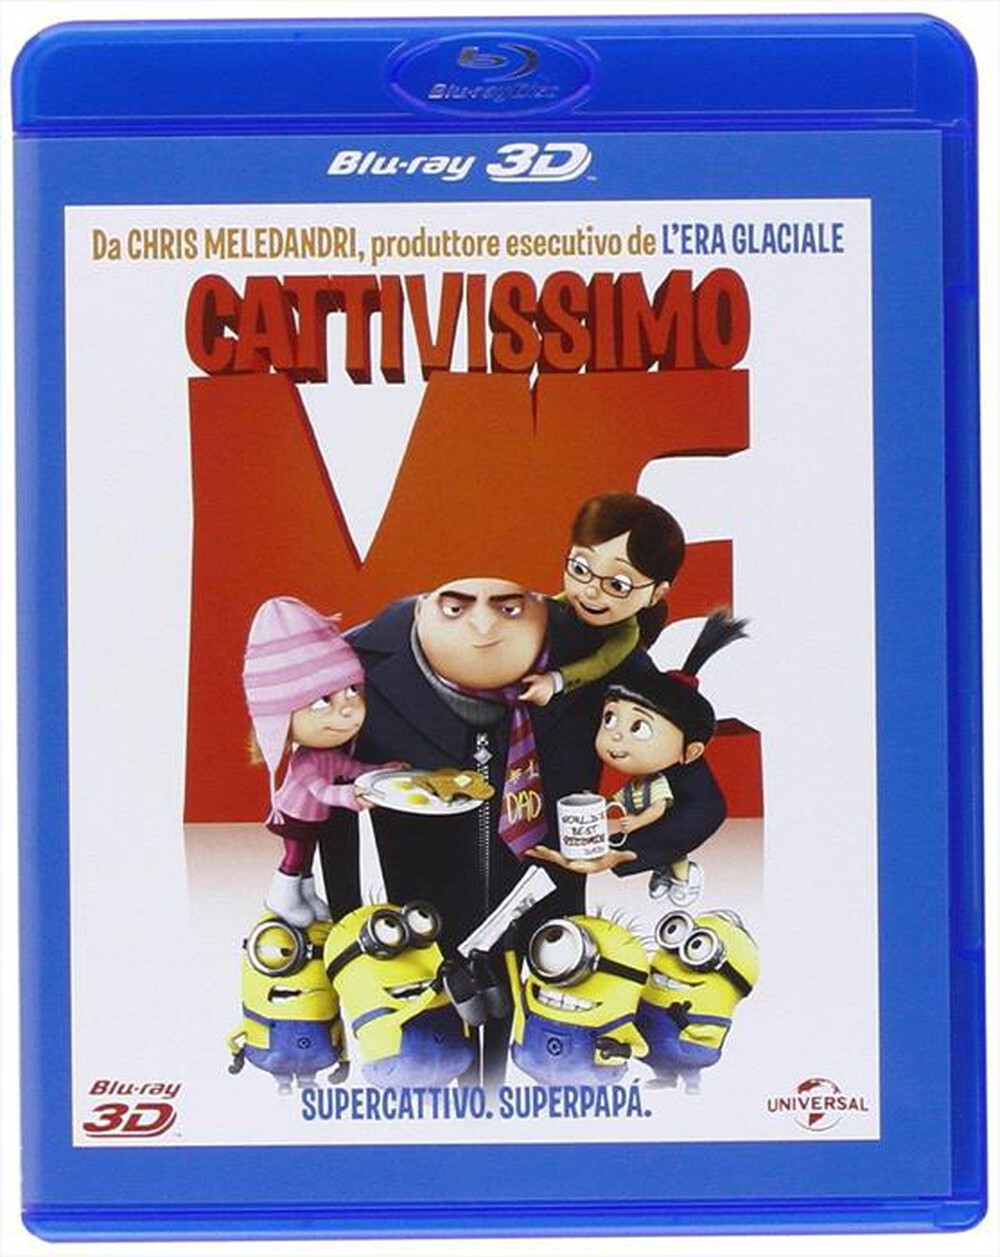 "UNIVERSAL PICTURES - Cattivissimo Me (3D) (Blu-Ray 3D)"